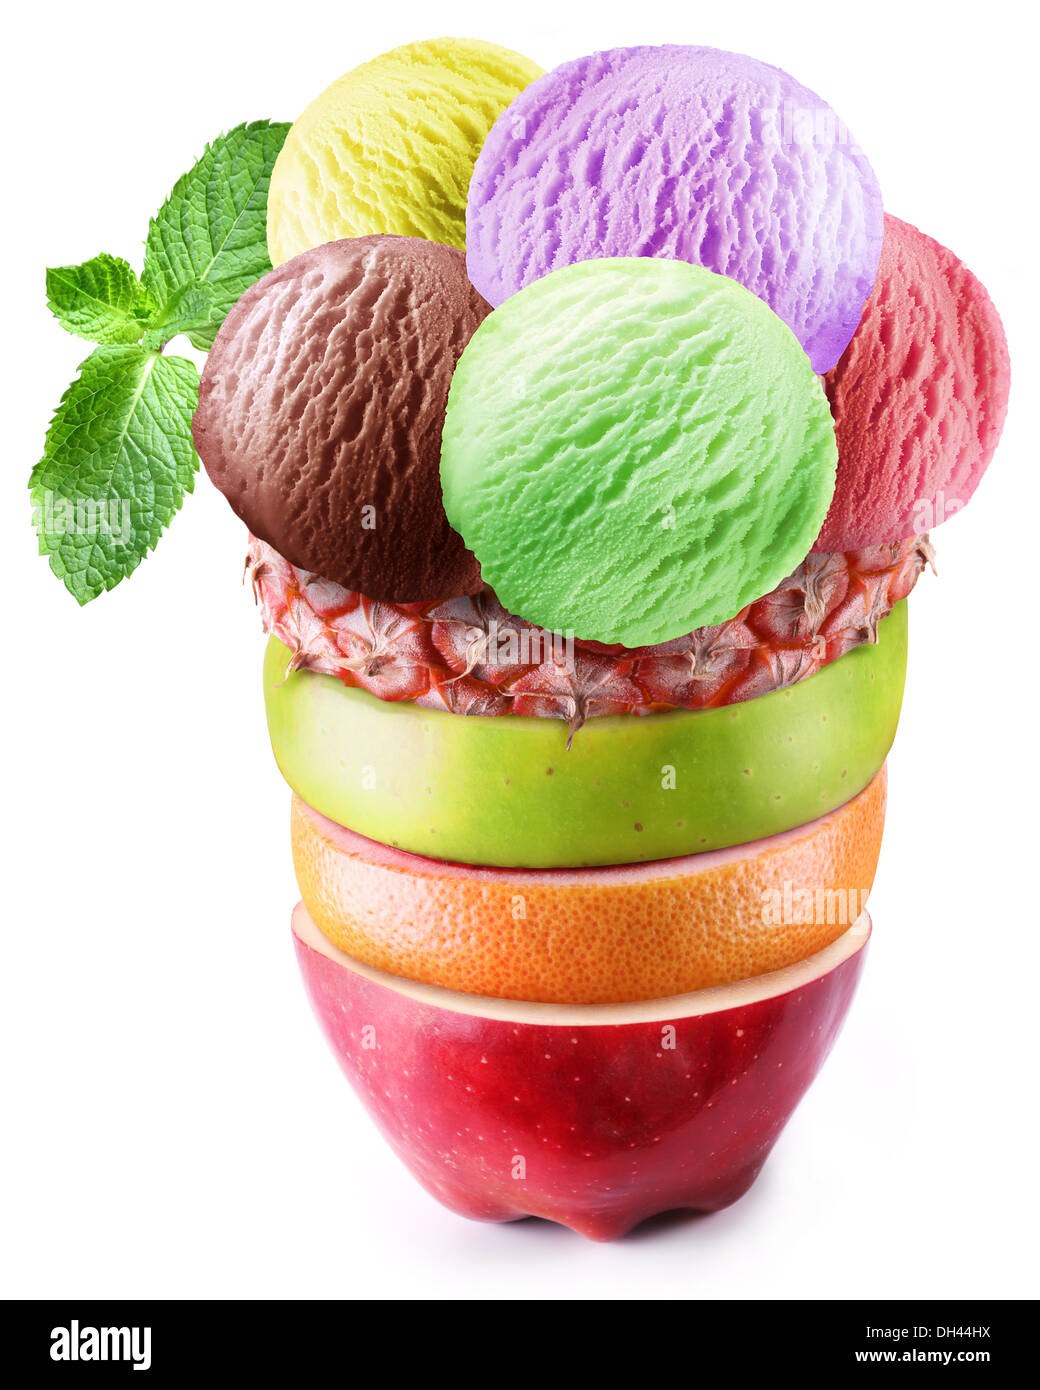 Ice-cream scoops with mint in fruity glass. Stock Photo